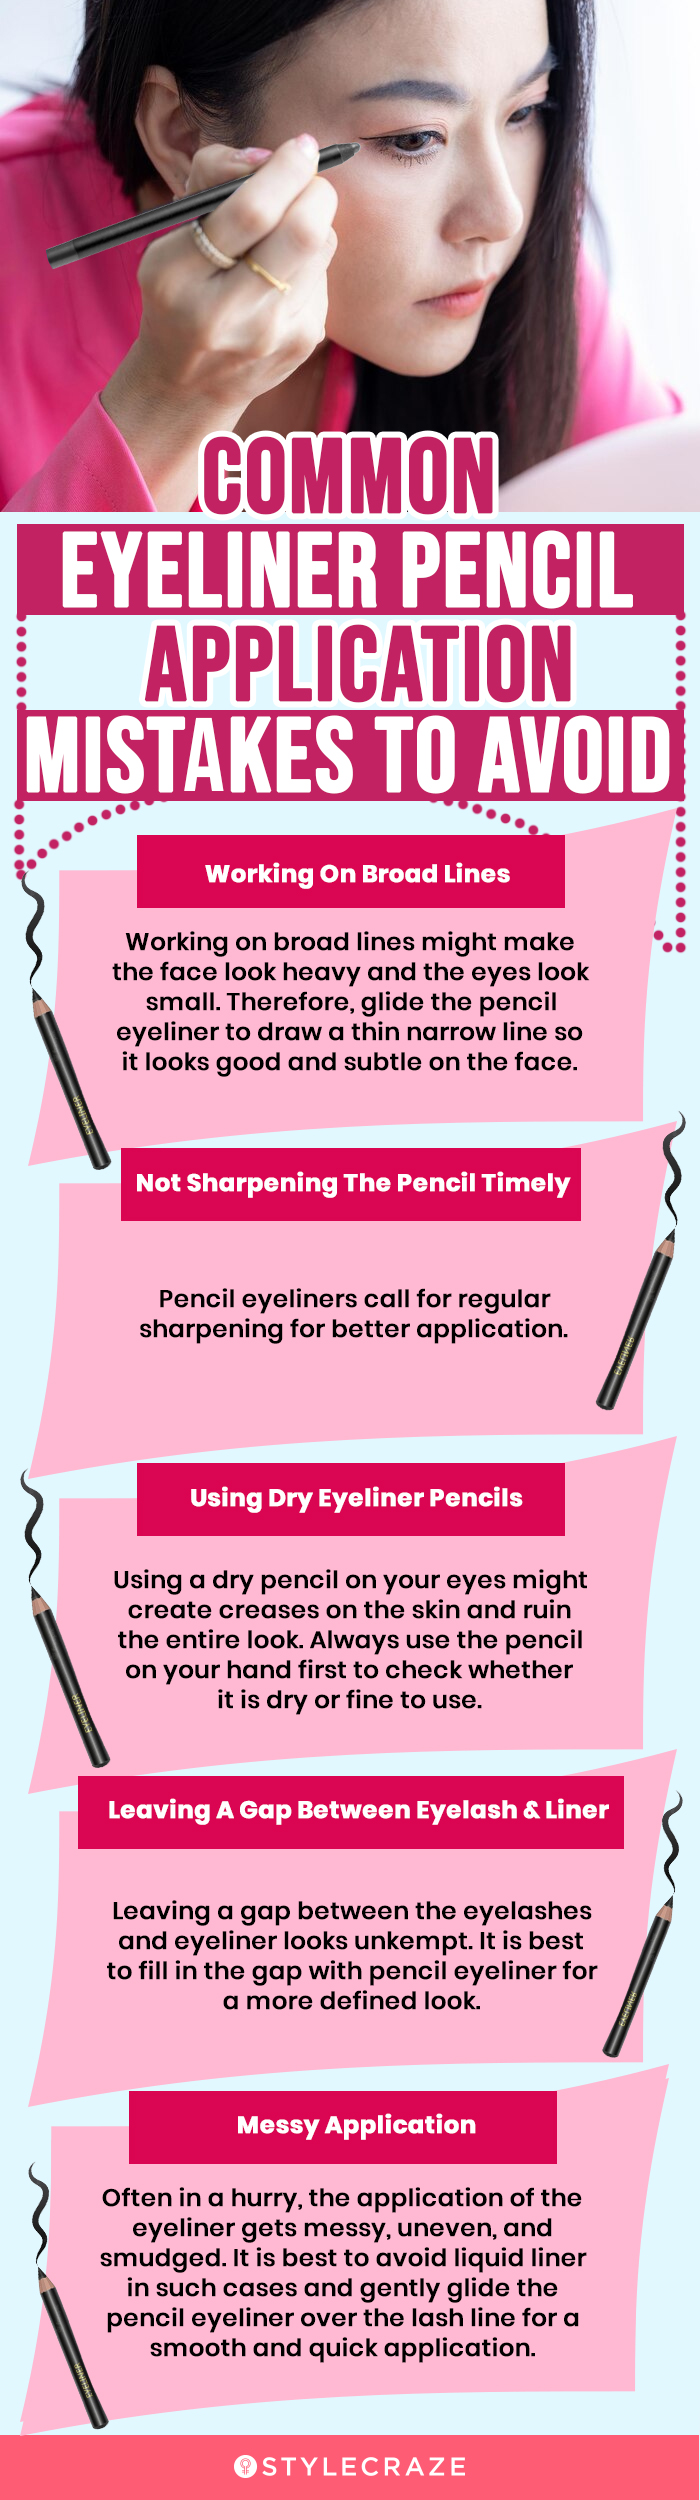 Common Eyeliner Pencil Application Mistakes To Avoid(infographic)